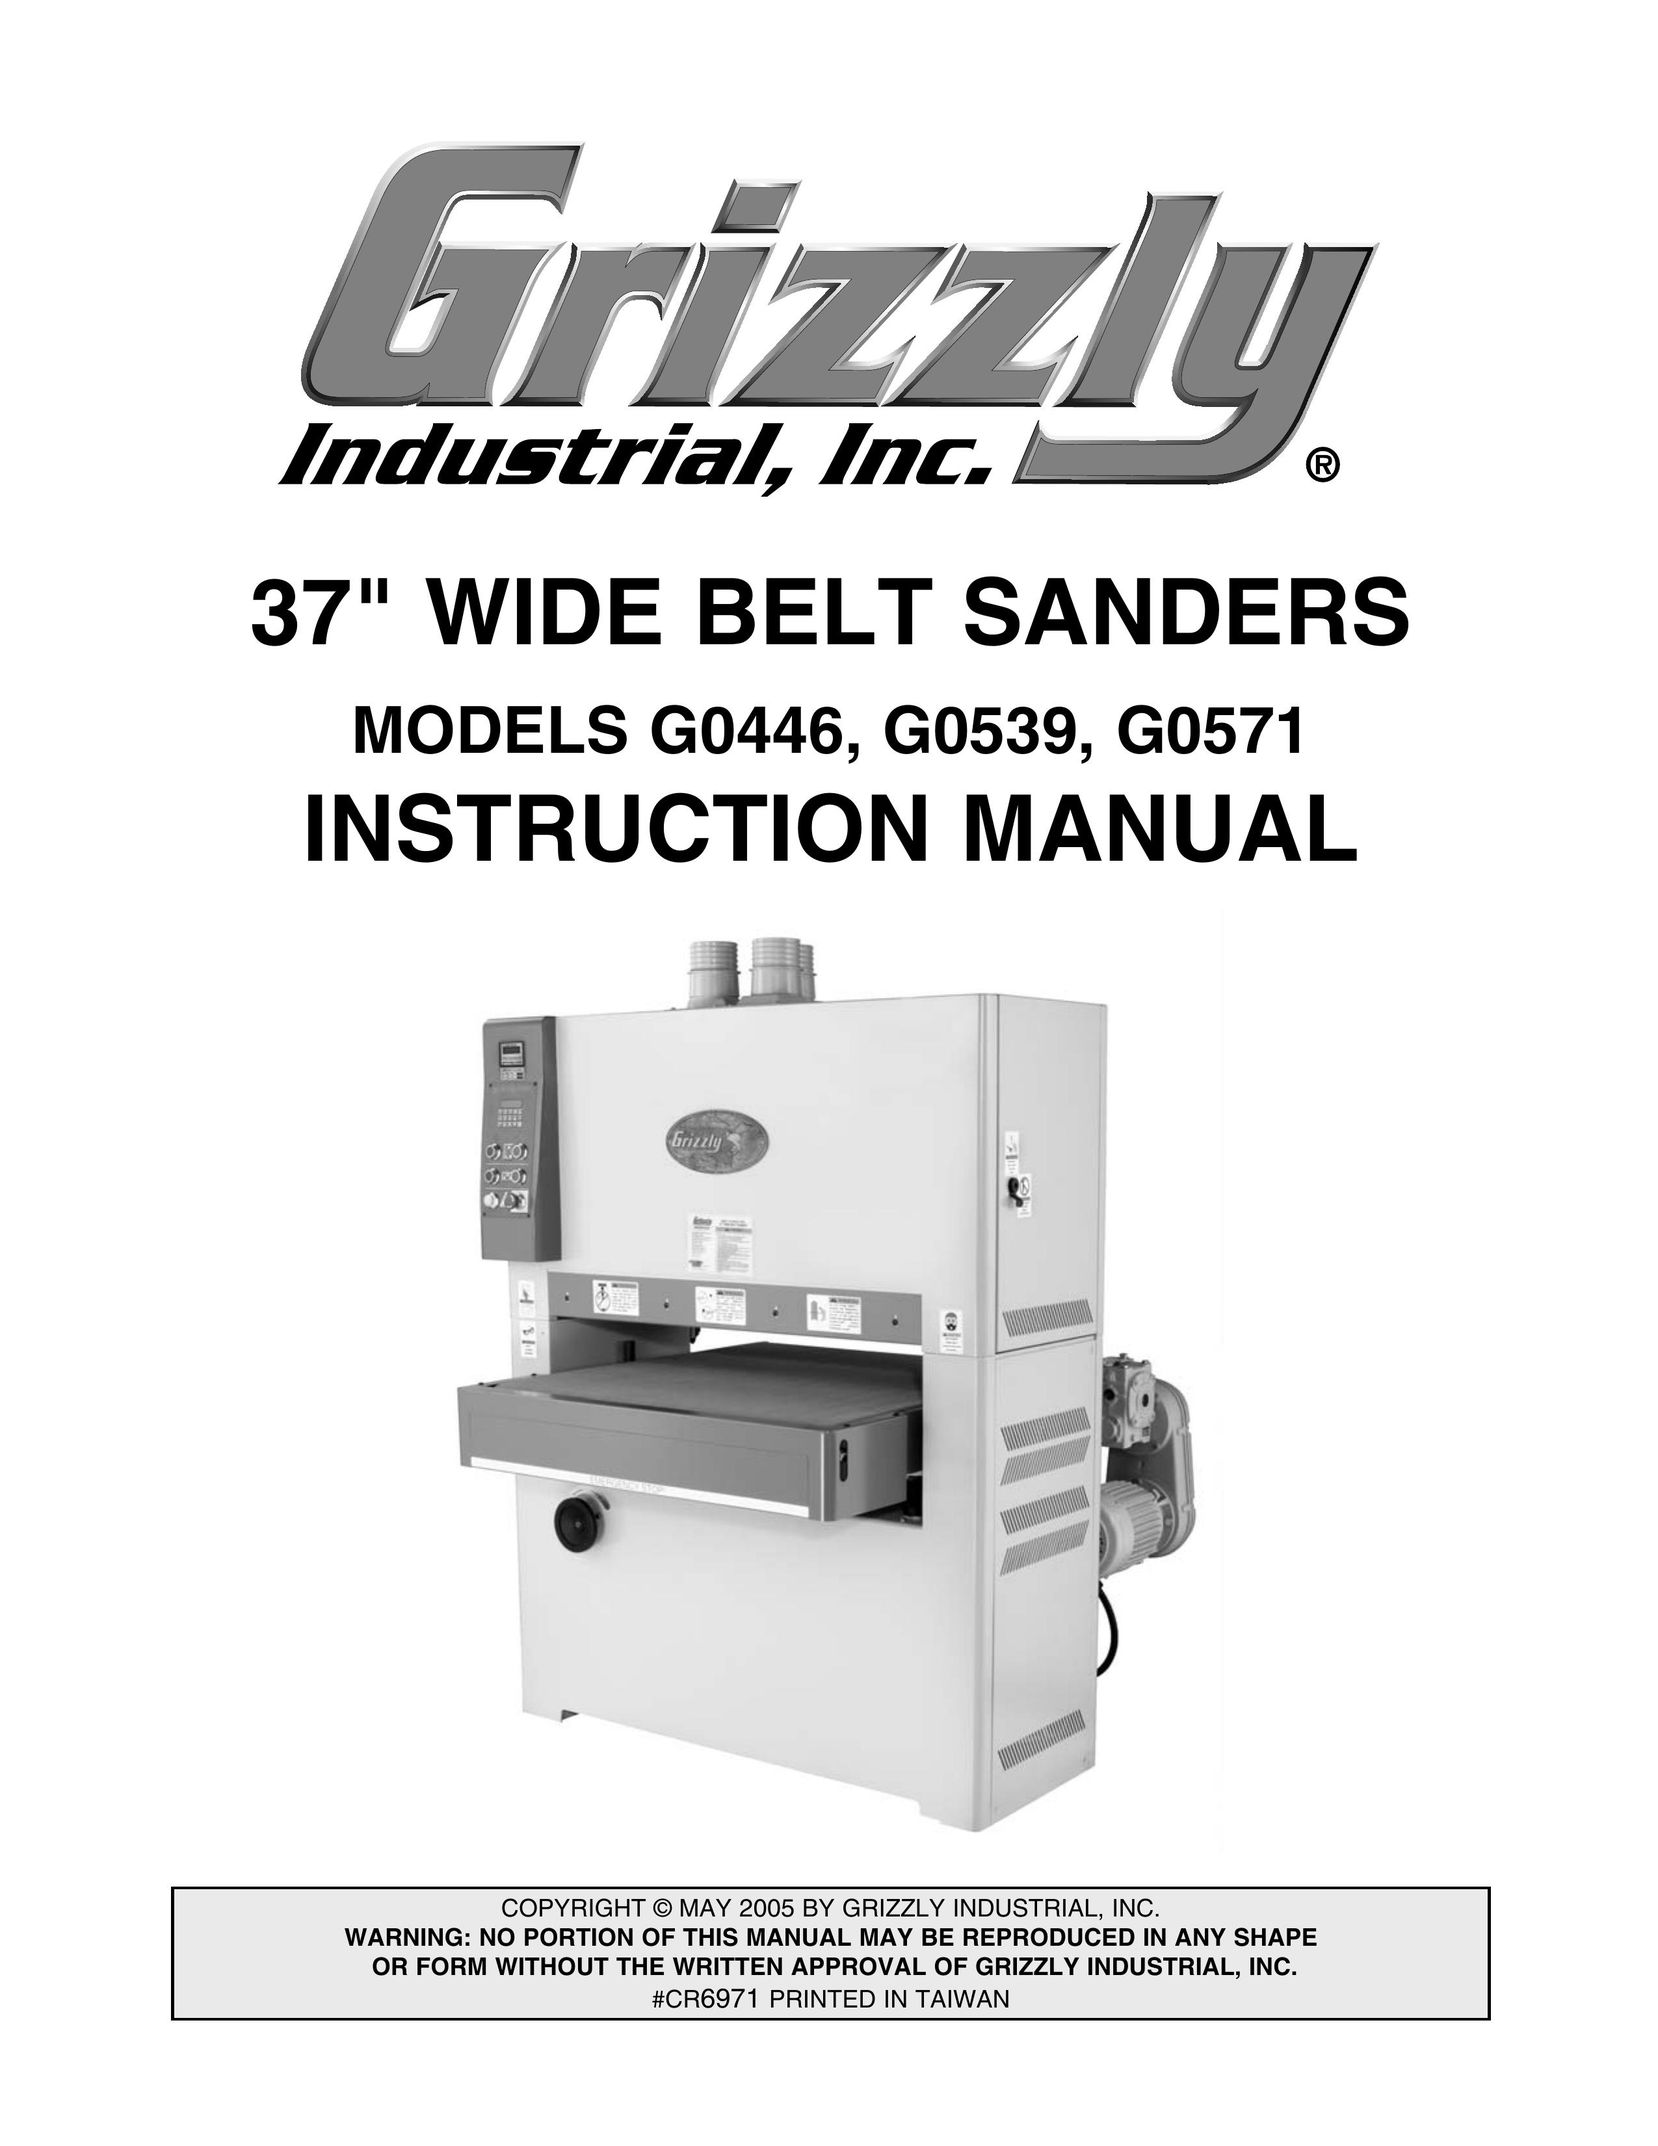 Grizzly G0539 Sander User Manual